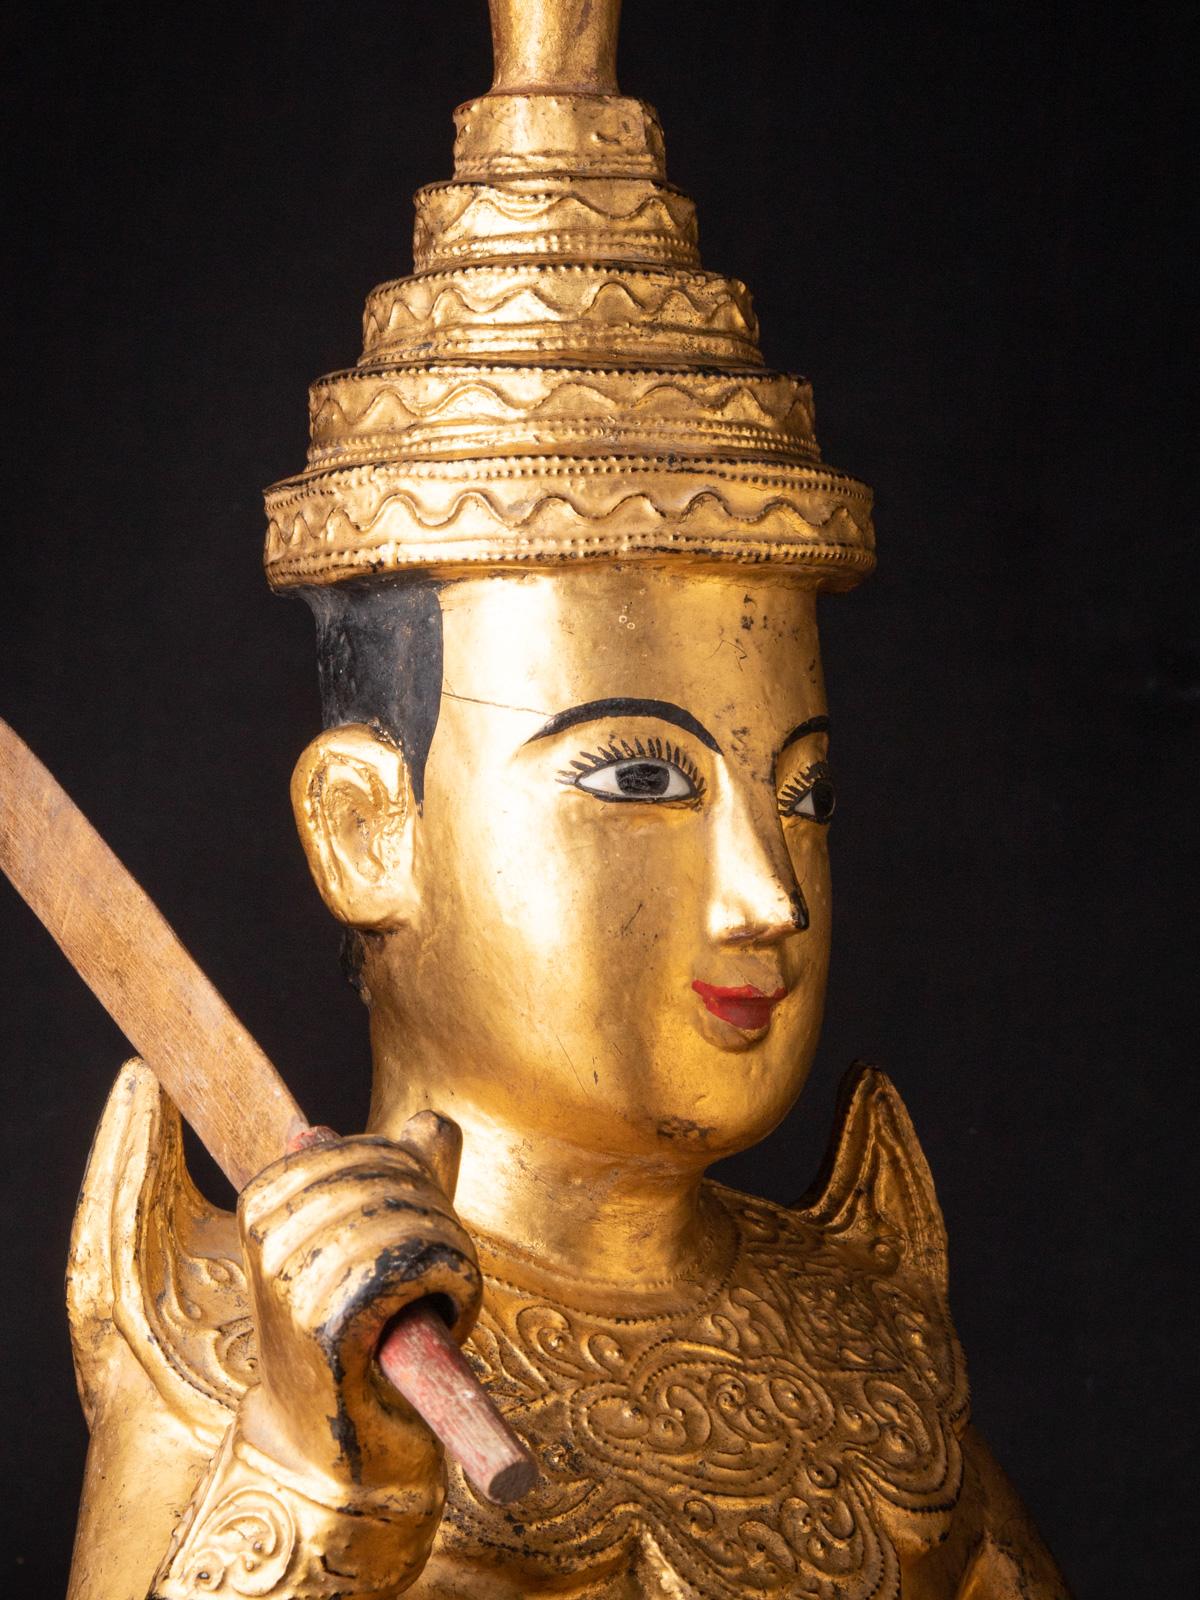 Material : wood
62 cm high
28 cm wide and 23 cm deep
Gilded with 24 krt. gold
19th century
With inlayed eyes
Weight: 14,25 kgs
Originating from Burma
Nr: 3029-4-9
 